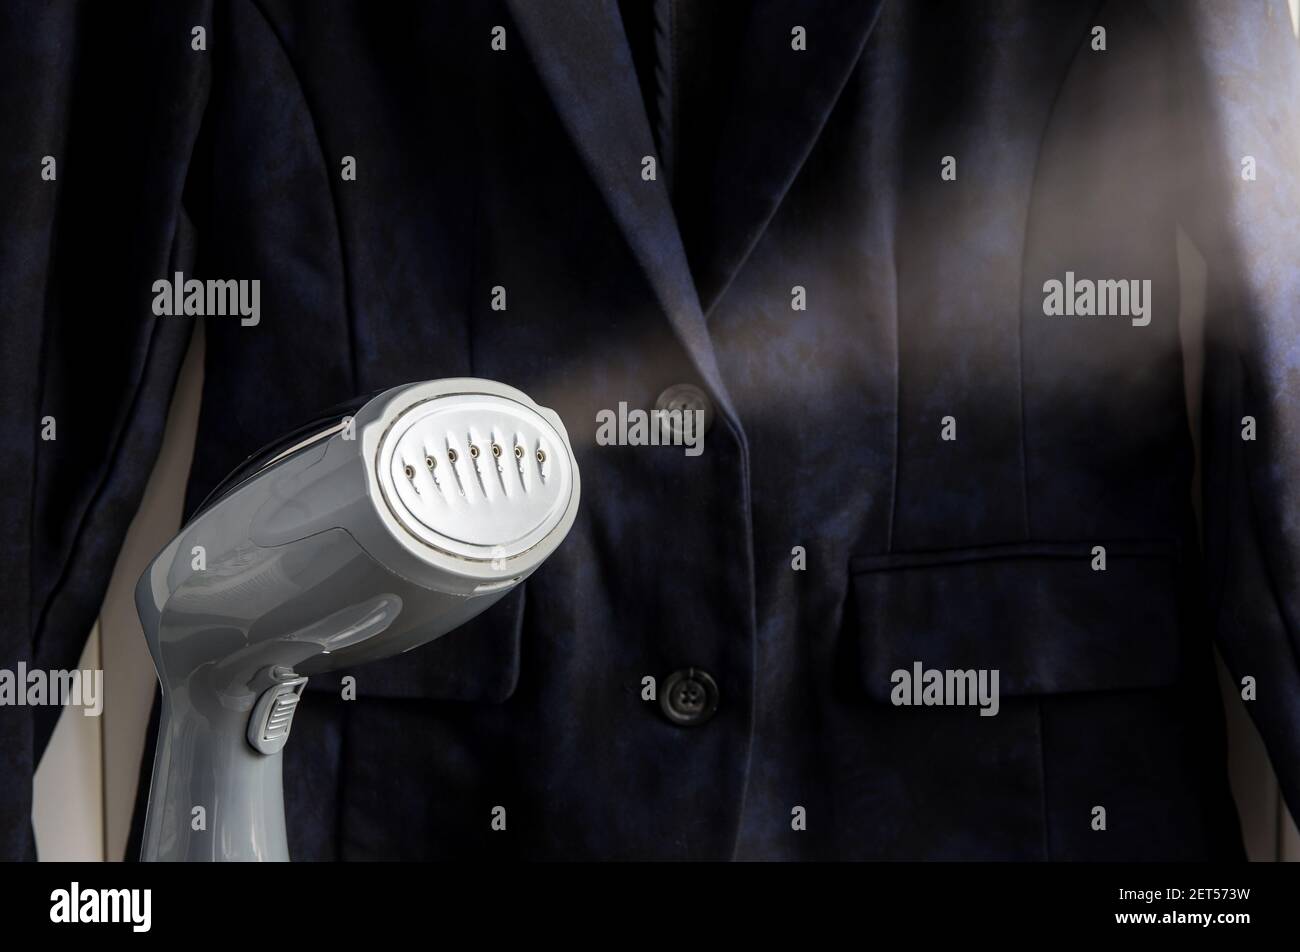 Close up view of small handheld fabric clothing steamer machine, hot steam coming, removing wrinkles. Stock Photo